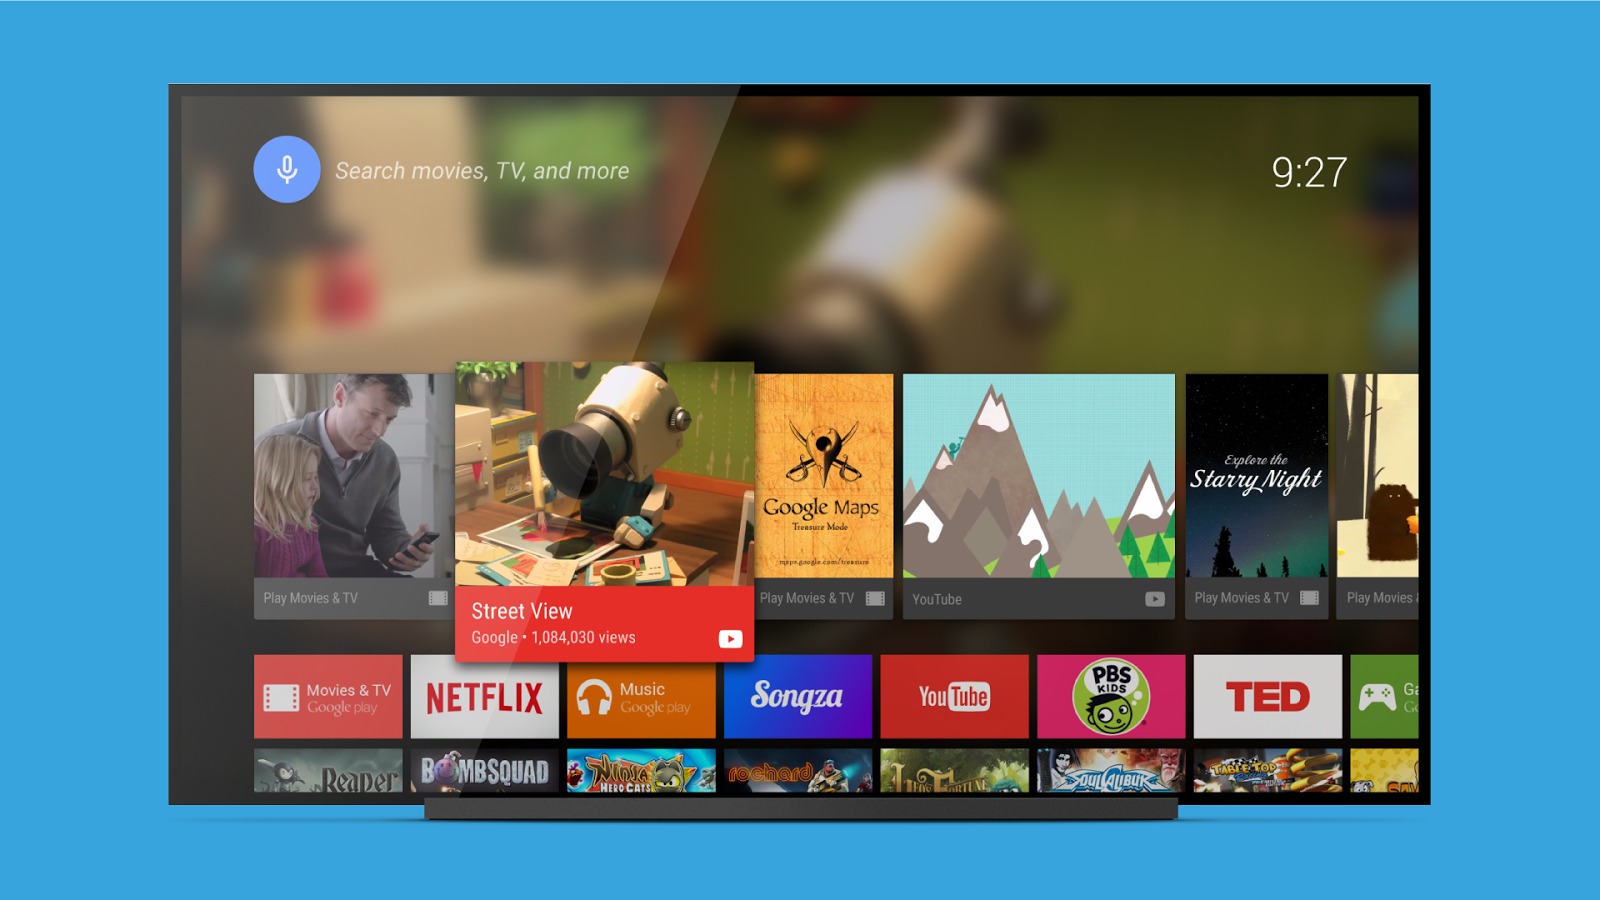 http://phandroid.com/wp-content/uploads/2014/12/Android-TV-Launcher.png